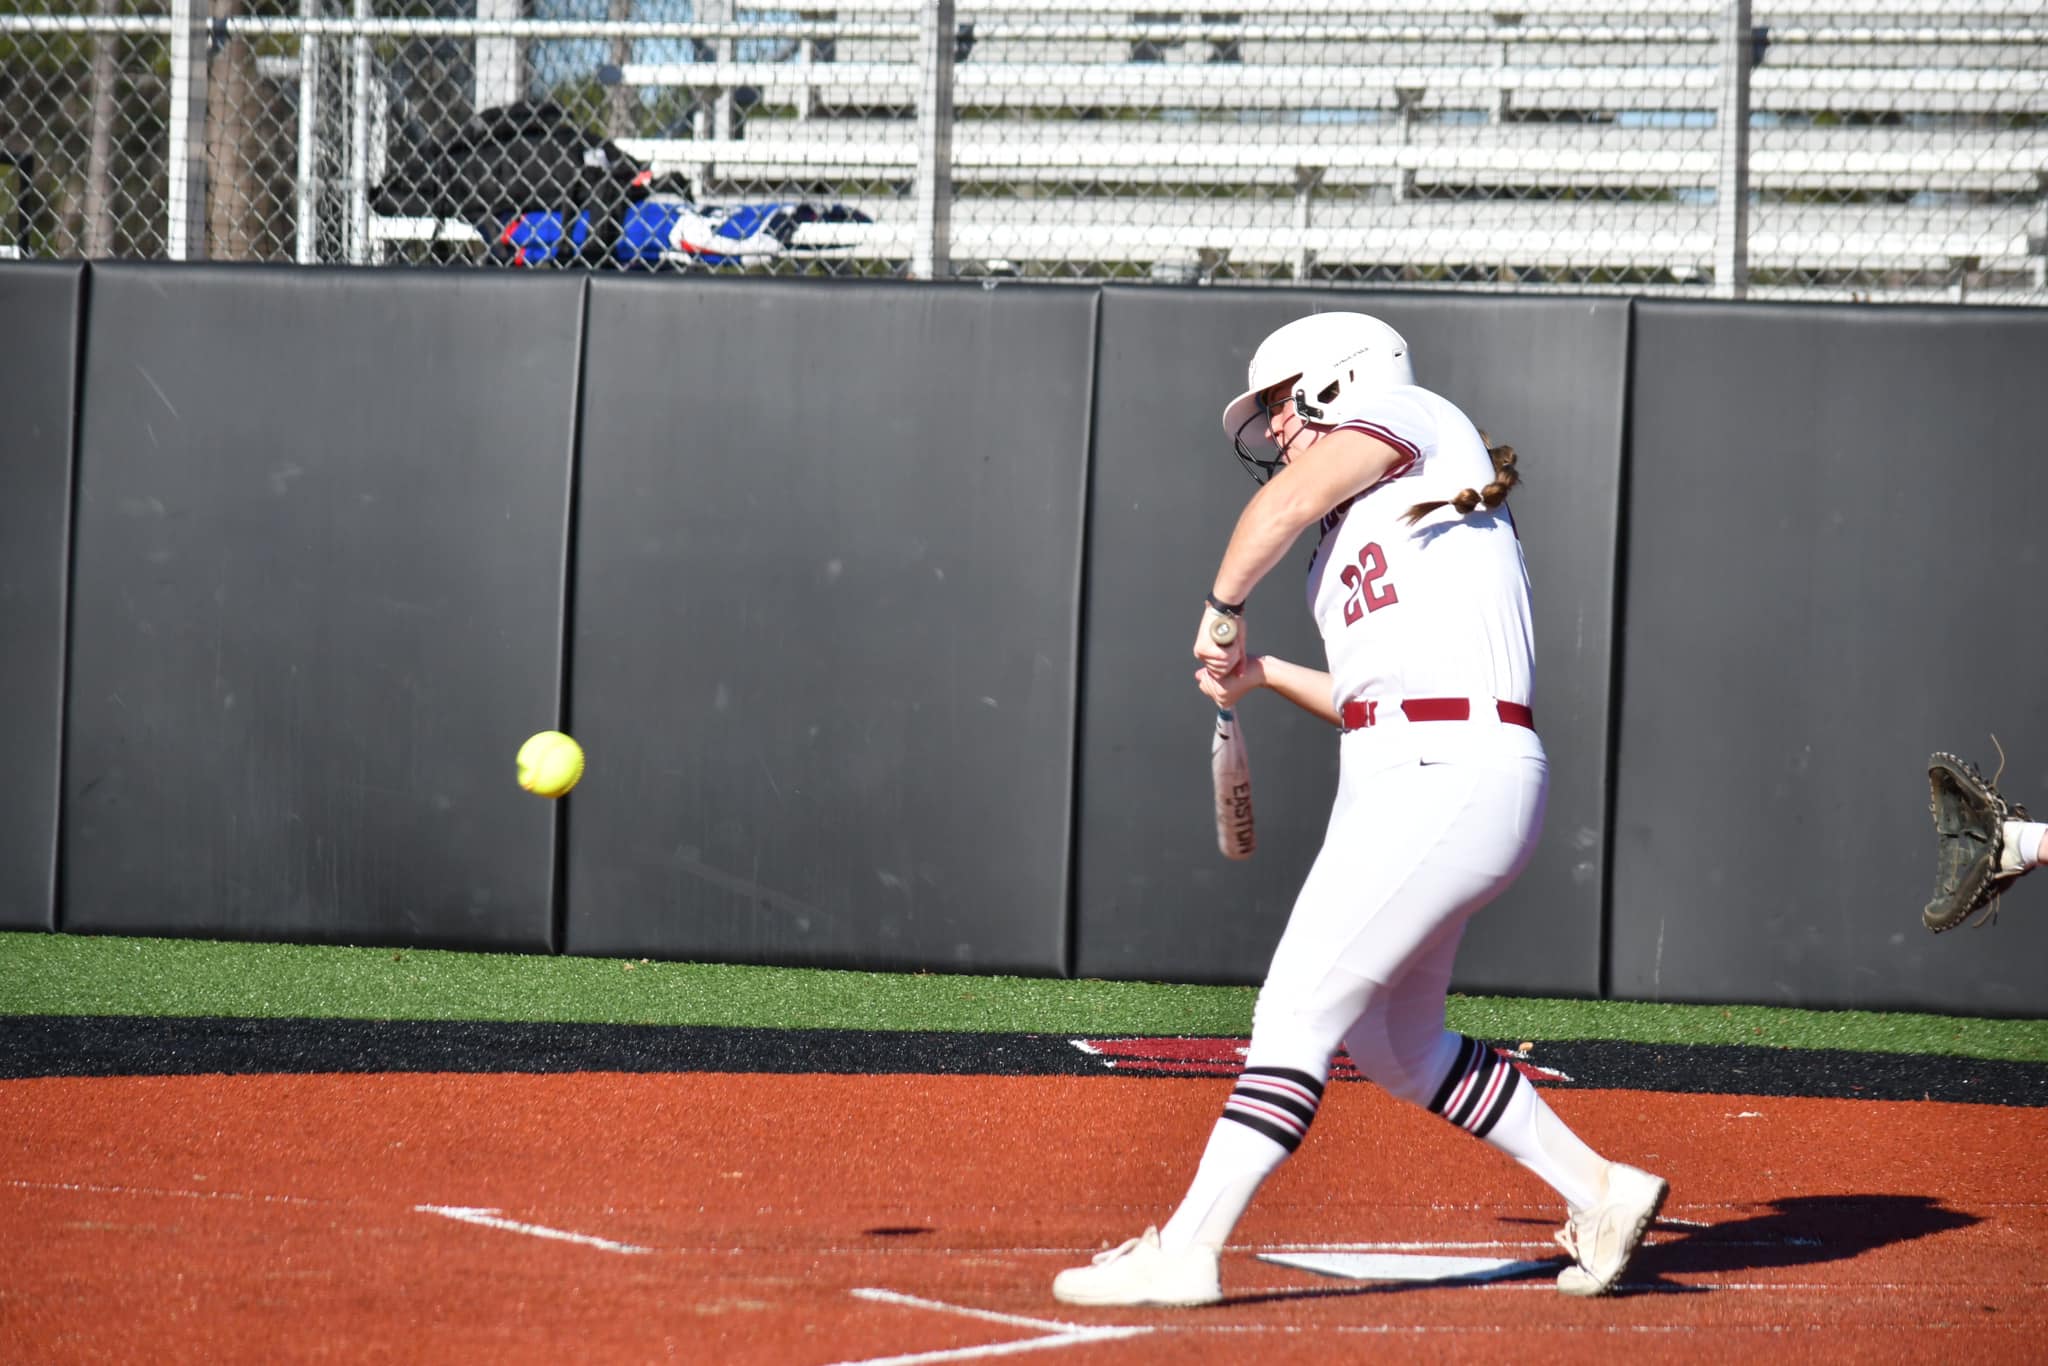 Lady Bulldogs split a doubleheader in Gulf Shores